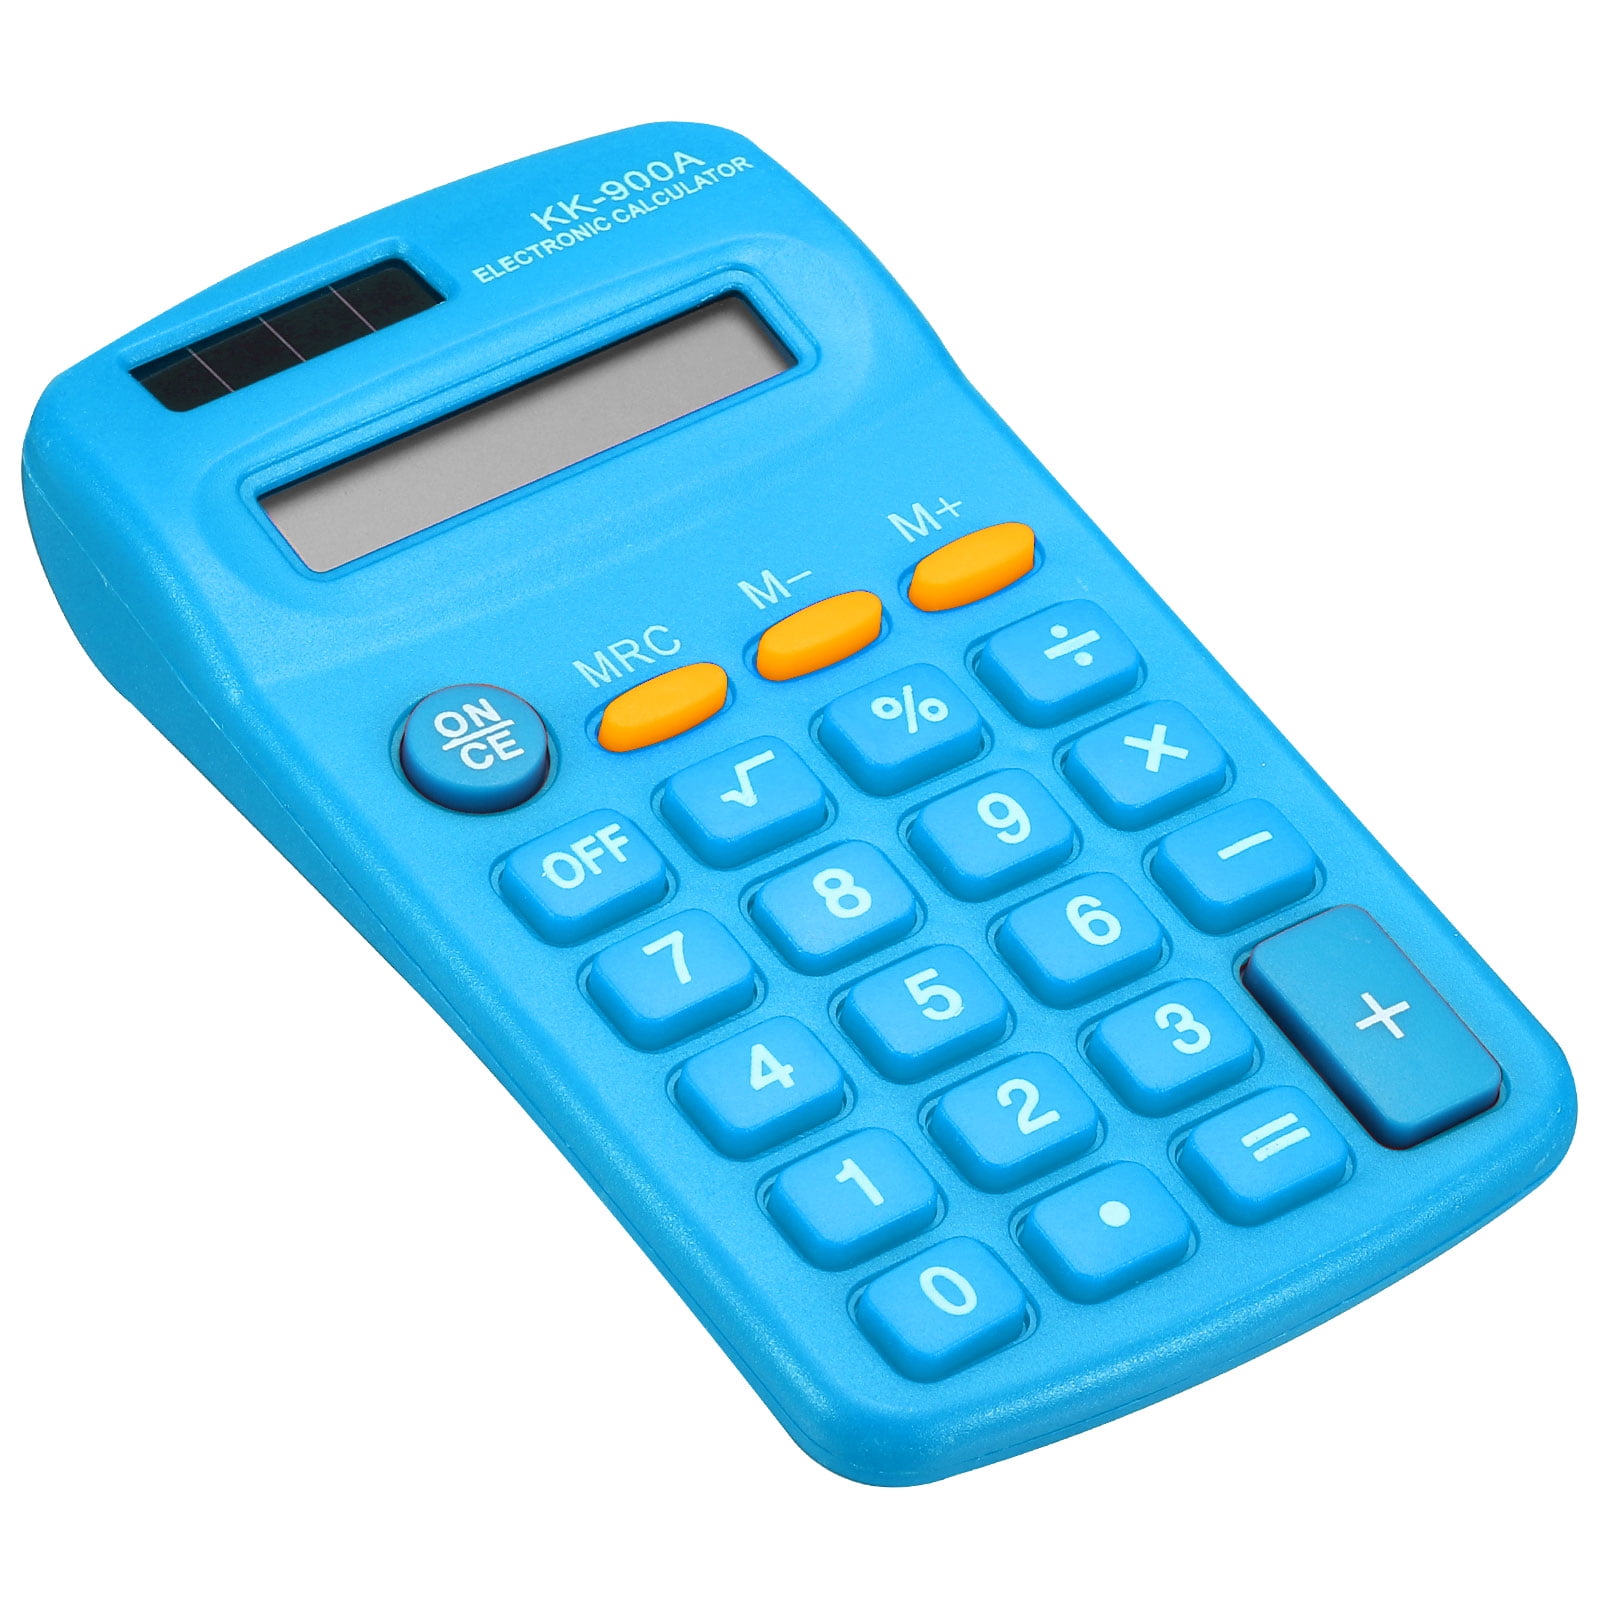 Uxcell Small Pocket Calculator Home Office Handheld Calculator 8